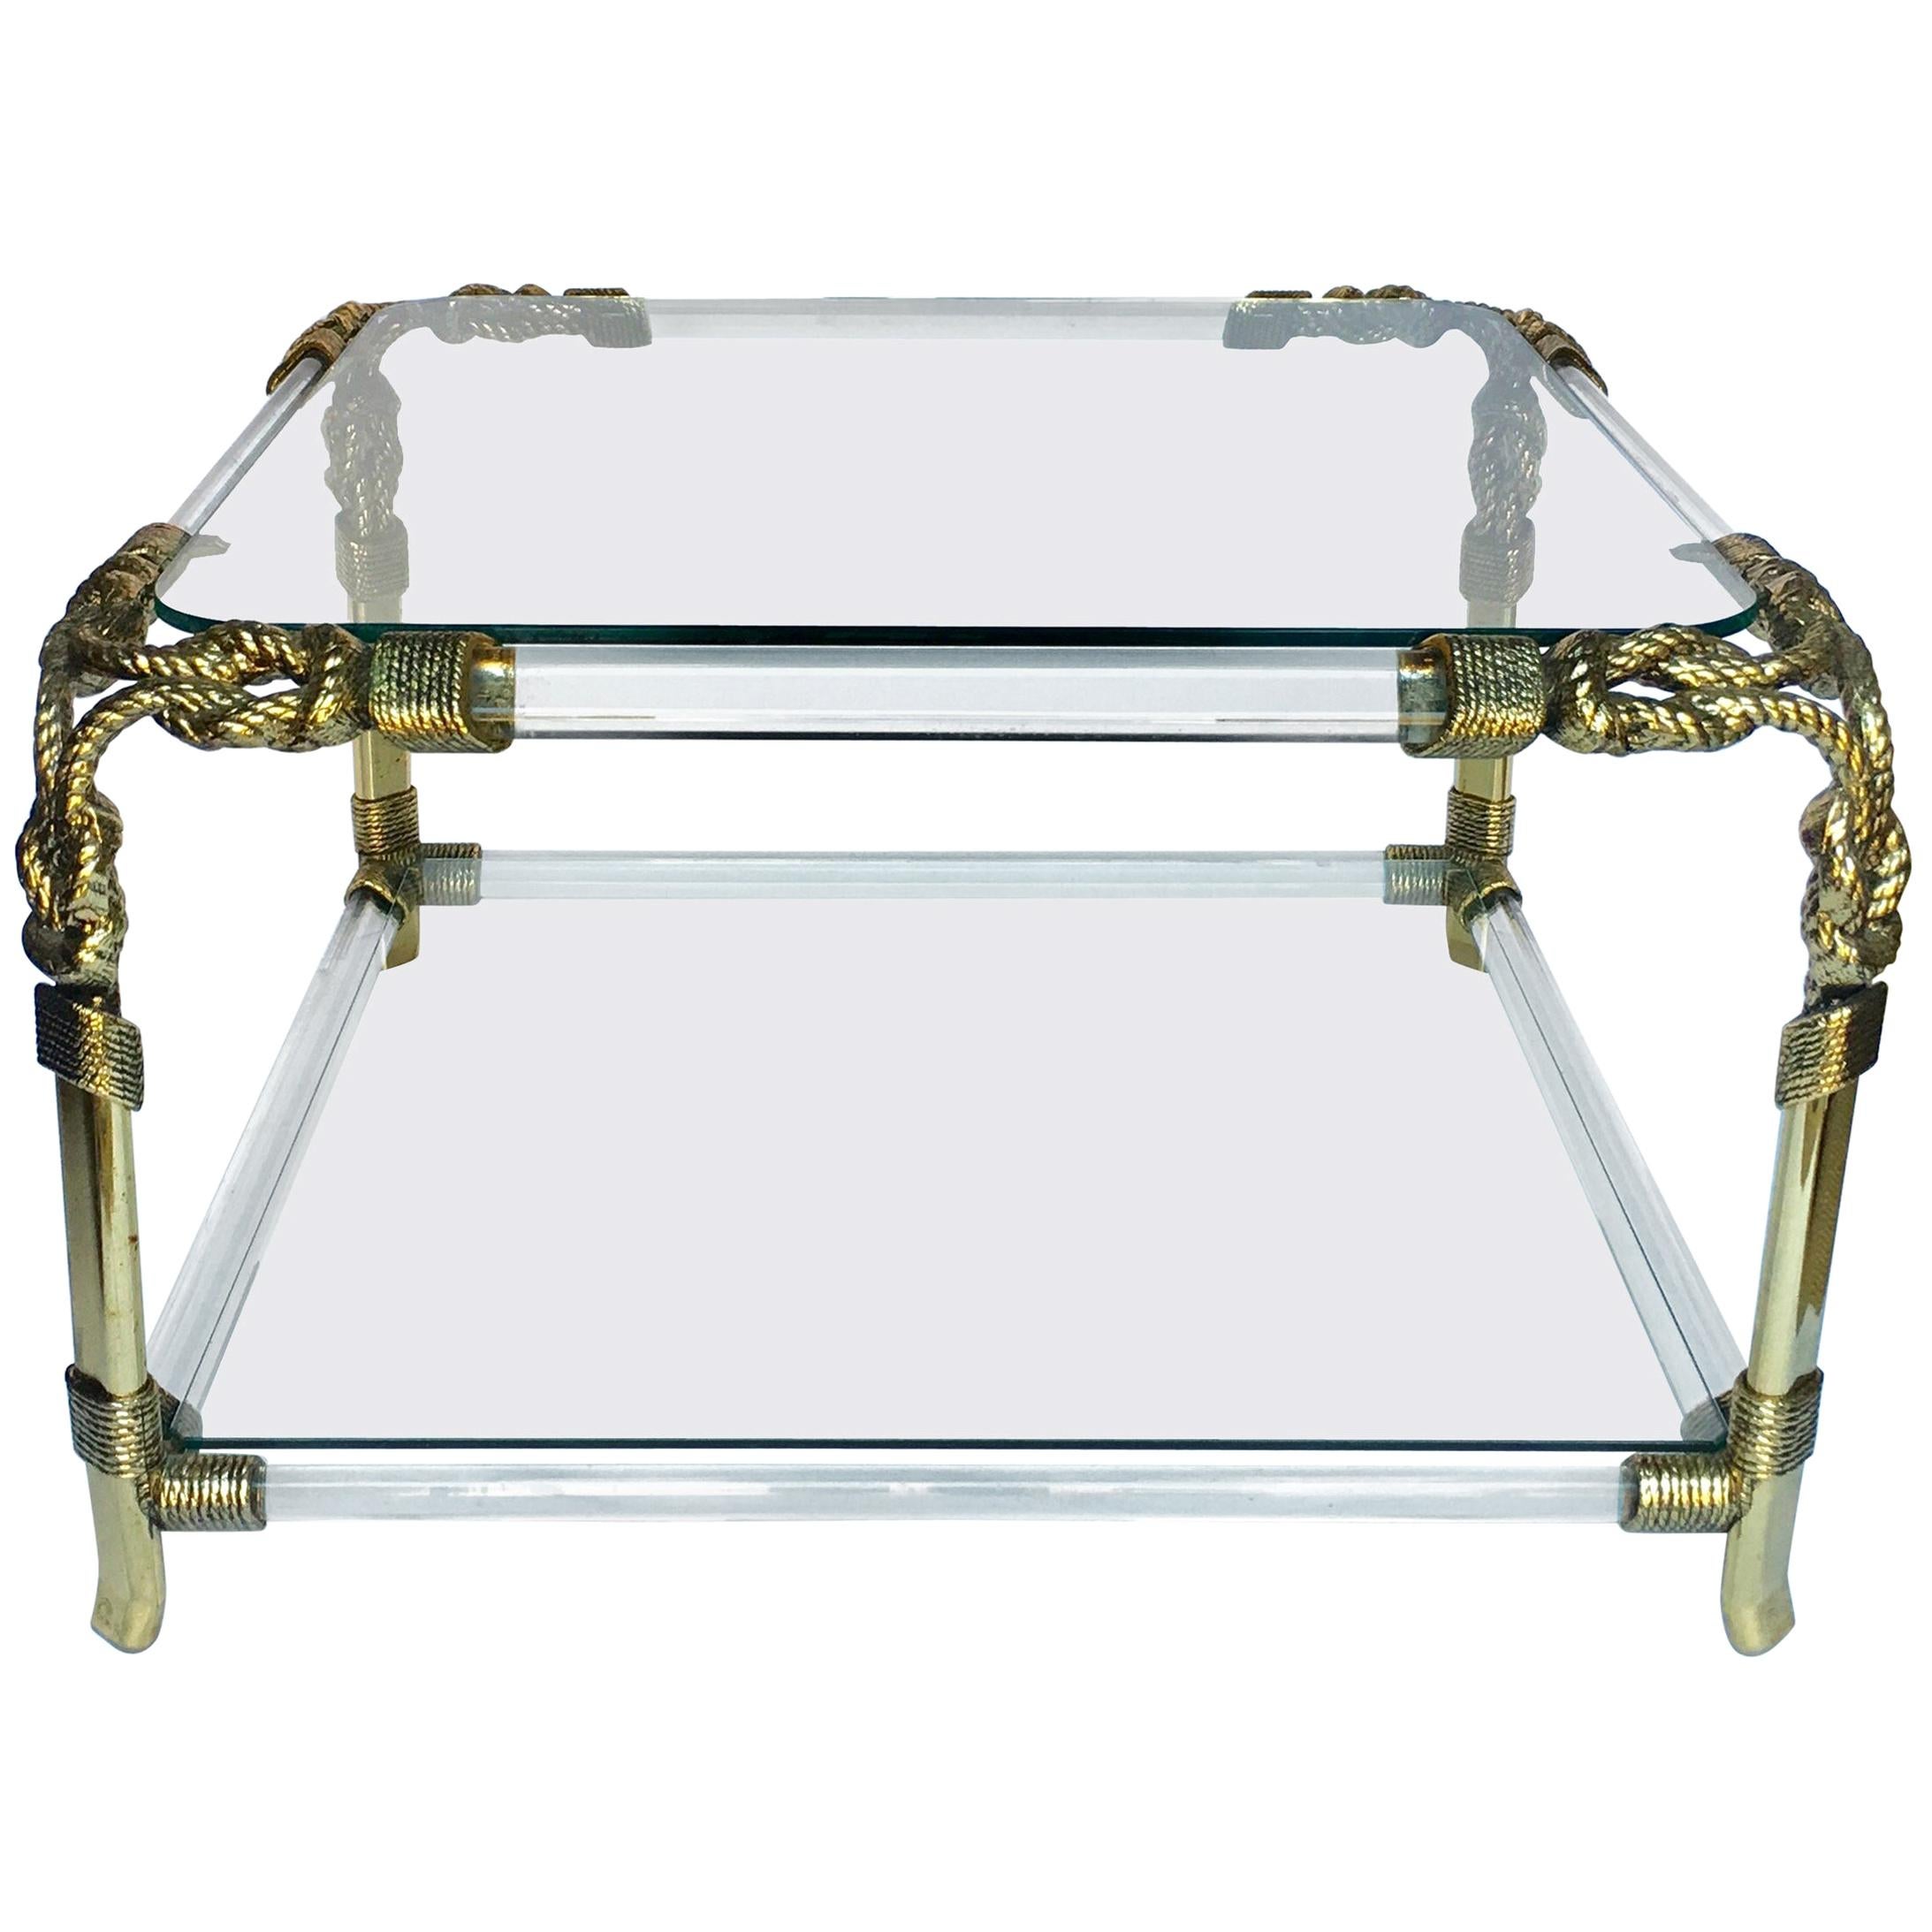 Hollywood Regency Style Sculptural Lucite and Glass Rope Coffee Table, Spain